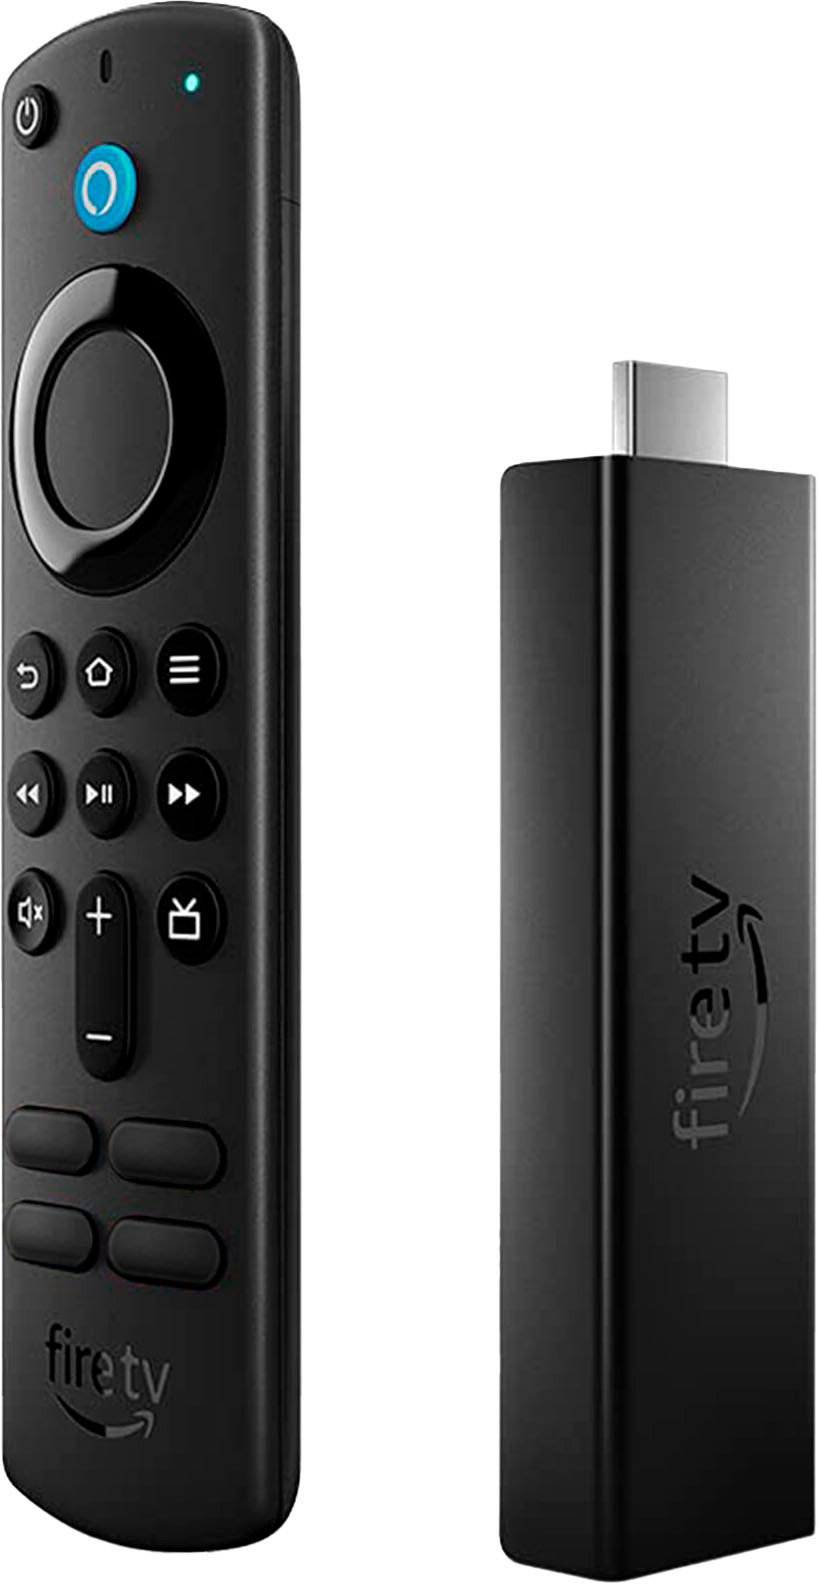 Amazon Fire TV Stick 4K Max Streaming Media with Alexa Voice Remote (includes TV controls) | streaming device Black B08MQZXN1X - Best